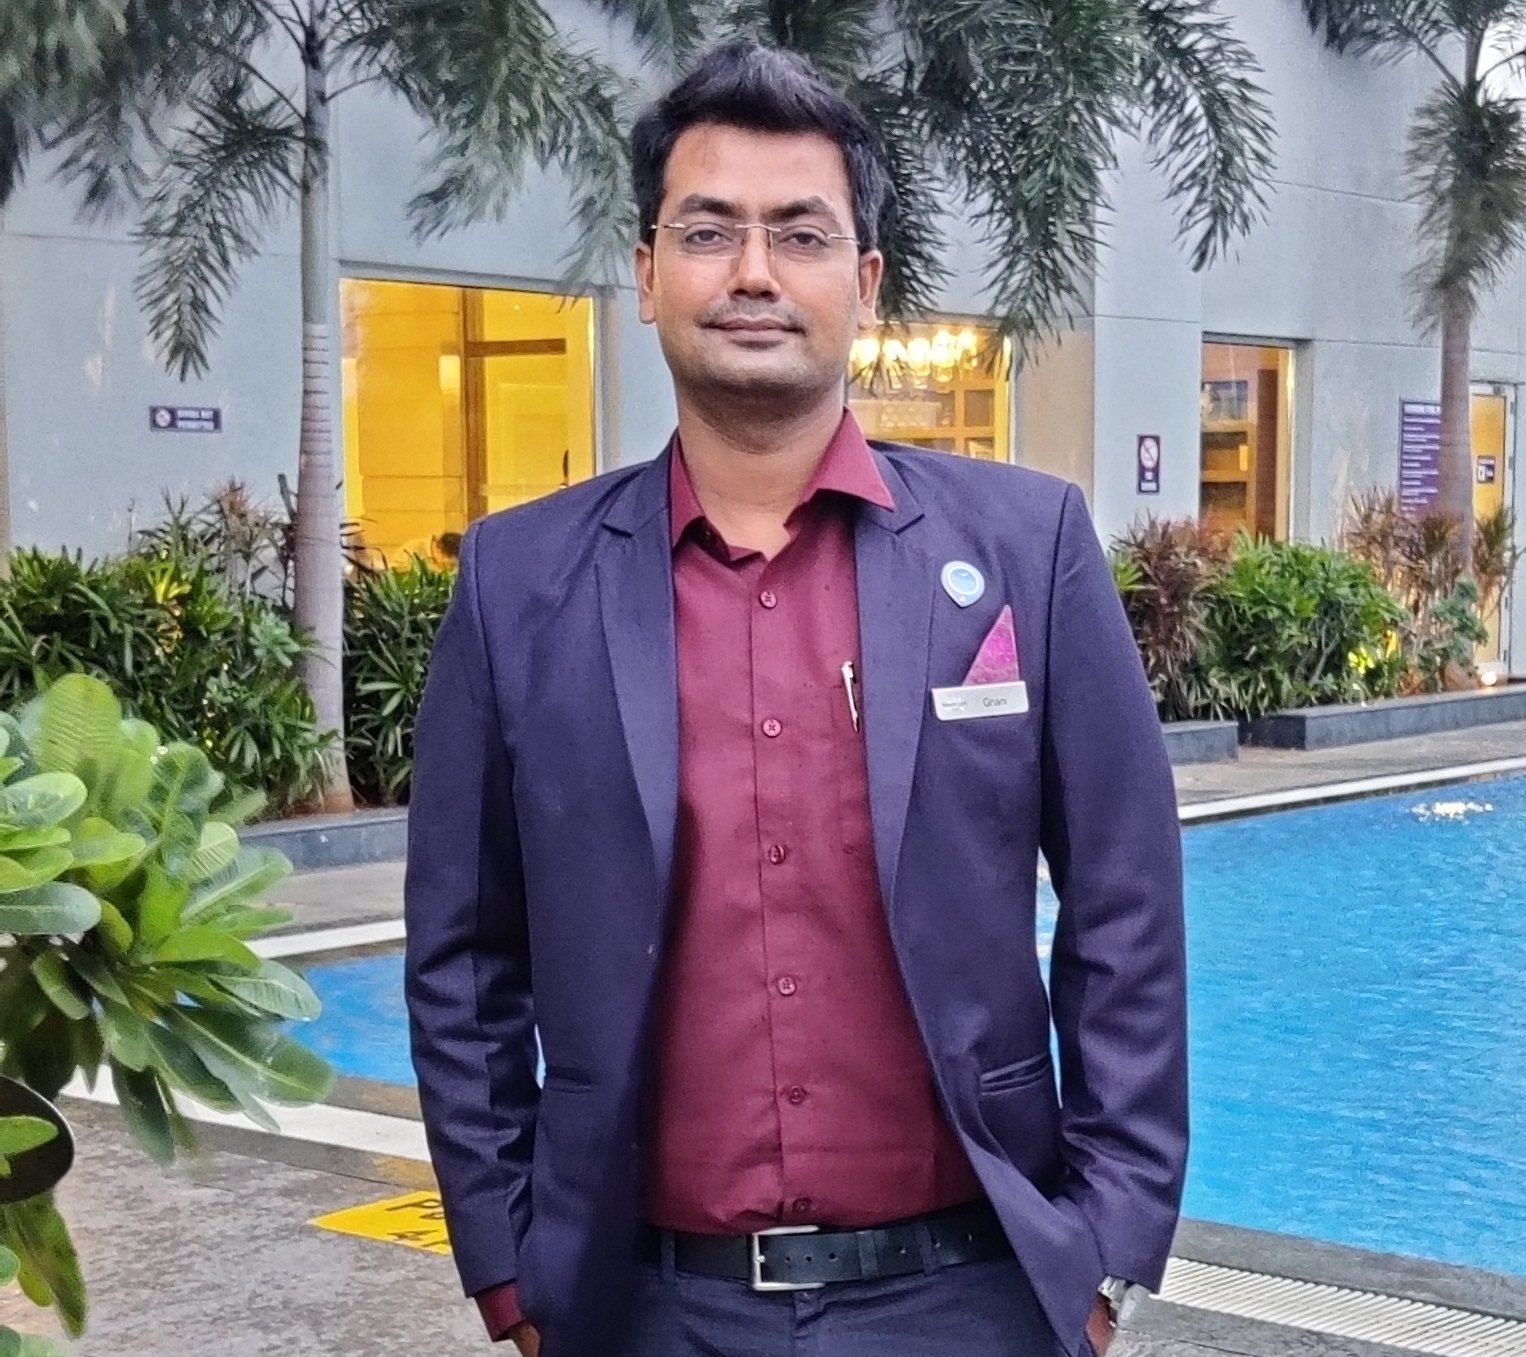 Mercure Chennai Sriperumbudur has appointed ‘Mr. Poola Gnanendra Reddy’, as Food and Beverage Manager